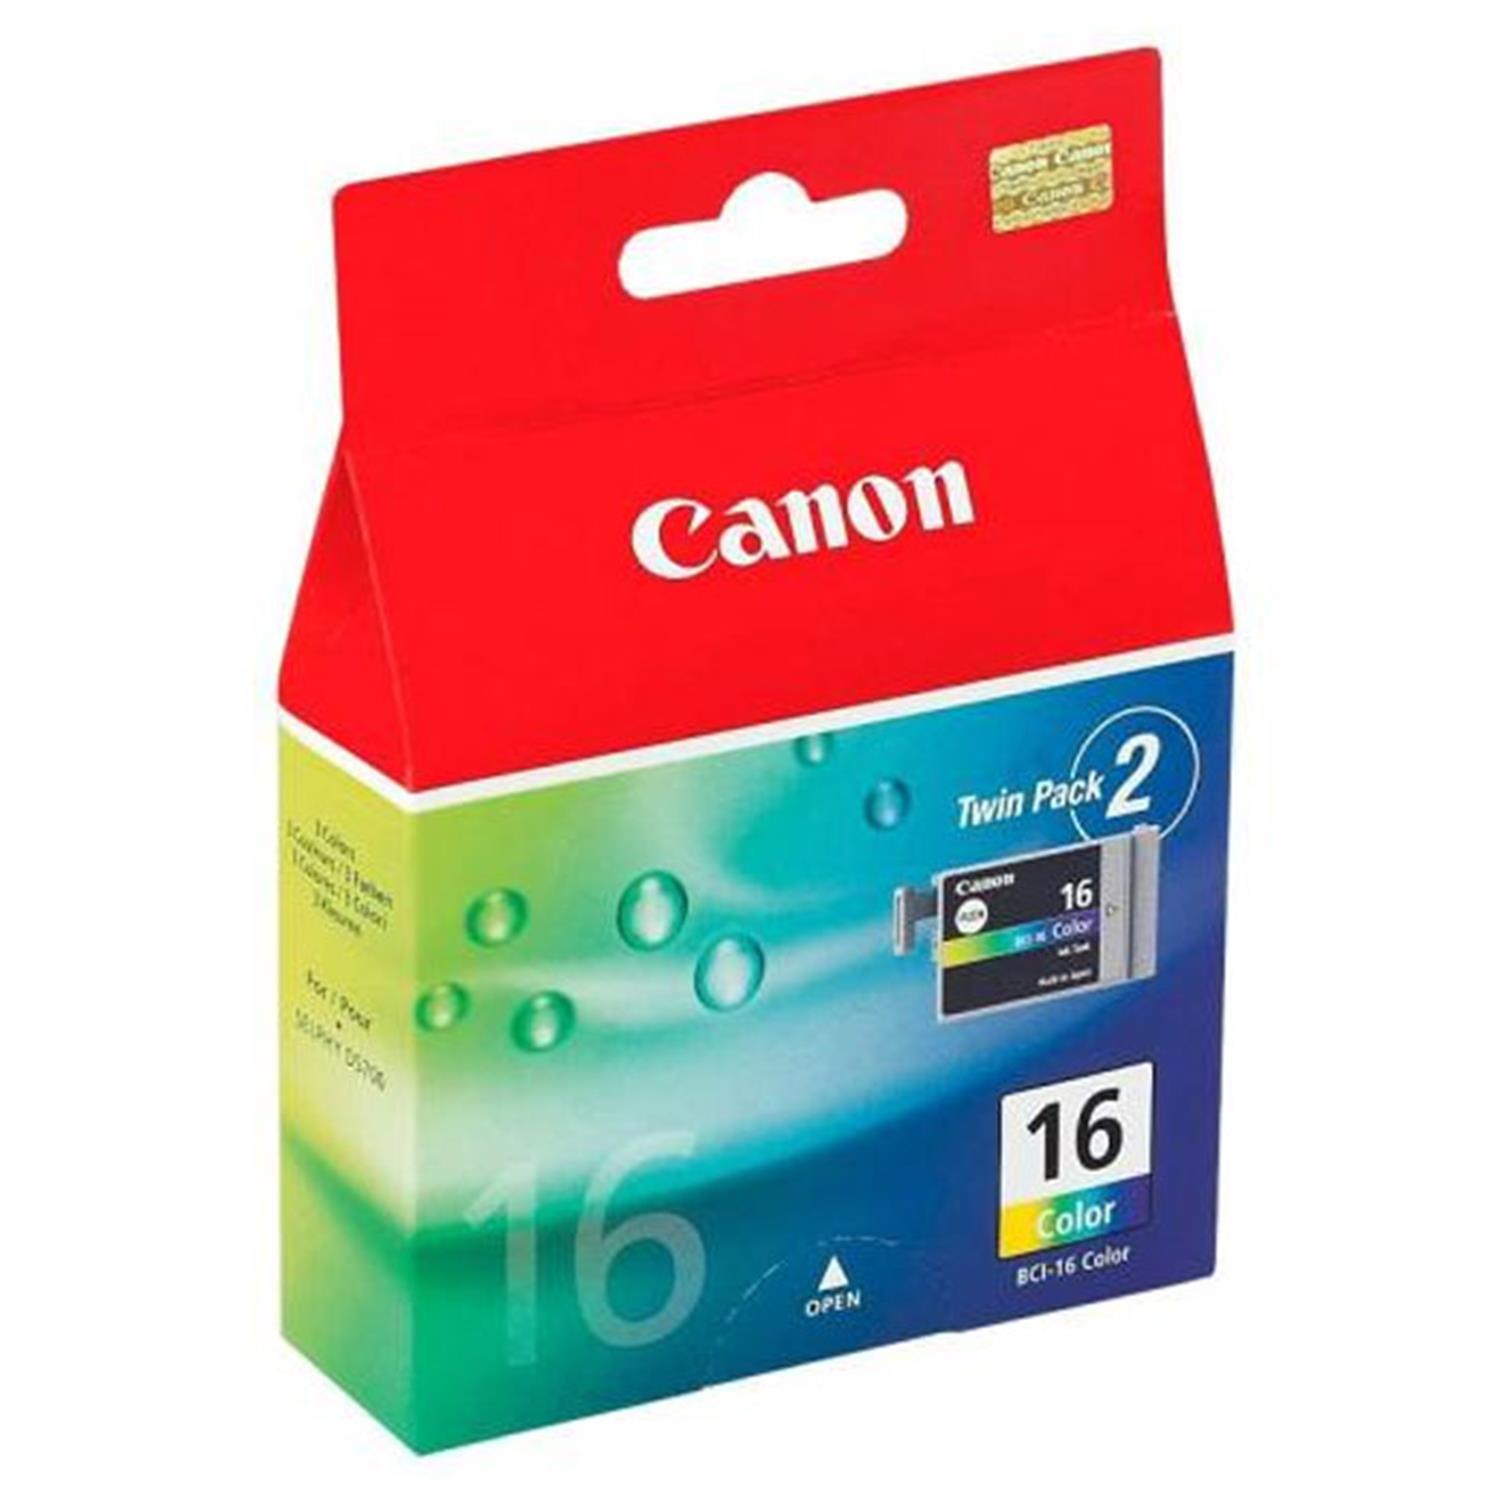 COLOUR INK DS700 / IP90 TWIN PACK image